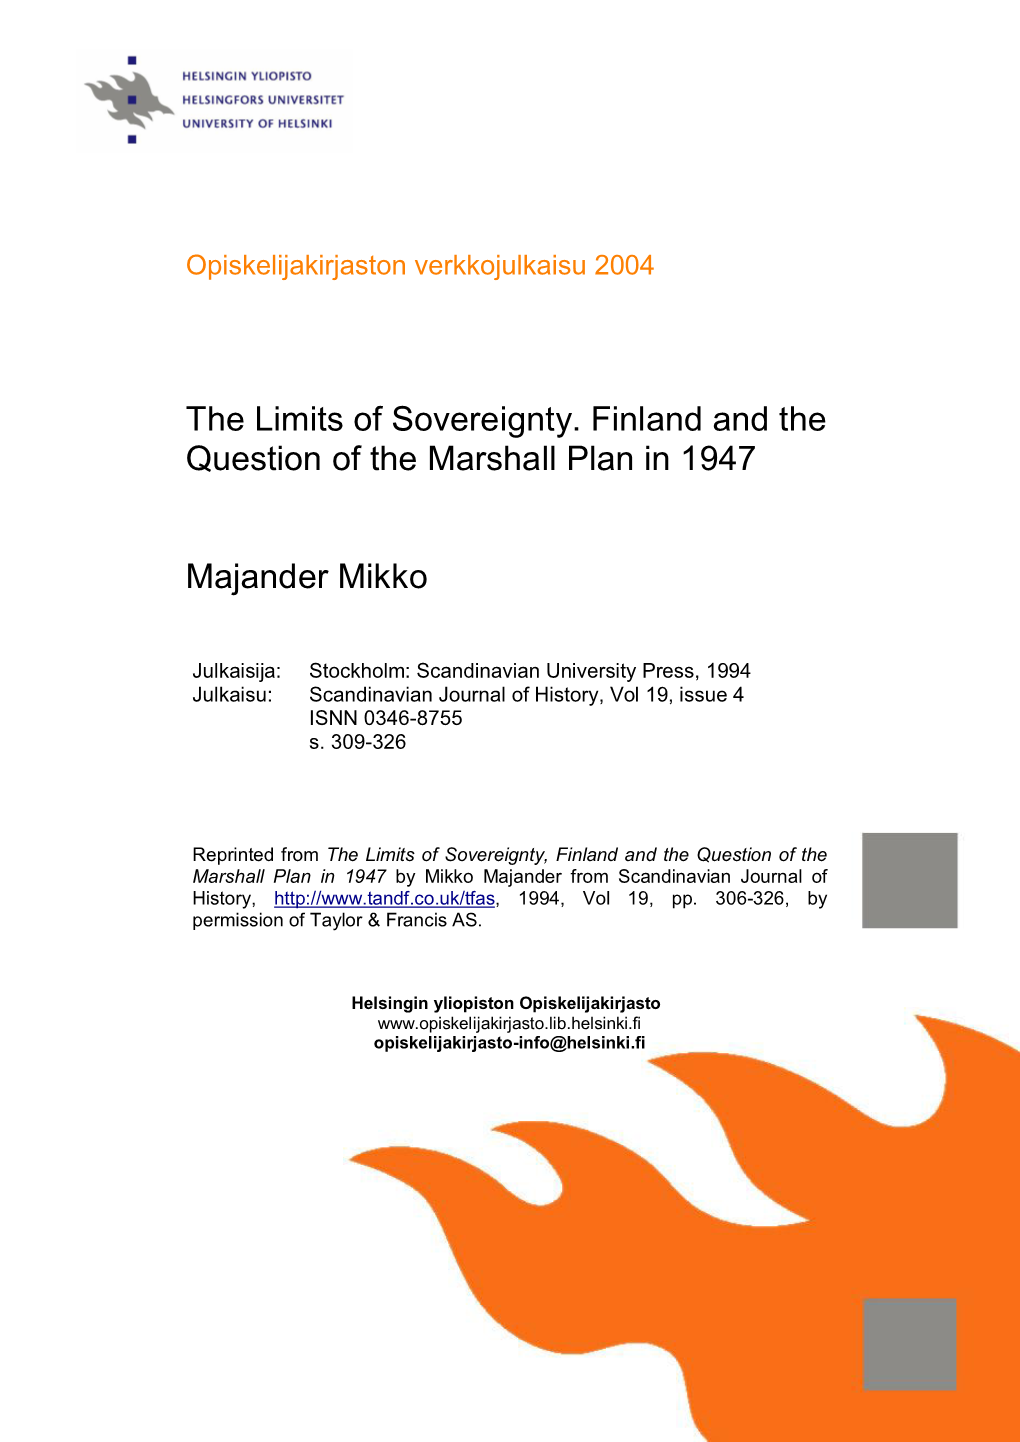 The Limits of Sovereignty. Finland and the Question of the Marshall Plan in 1947